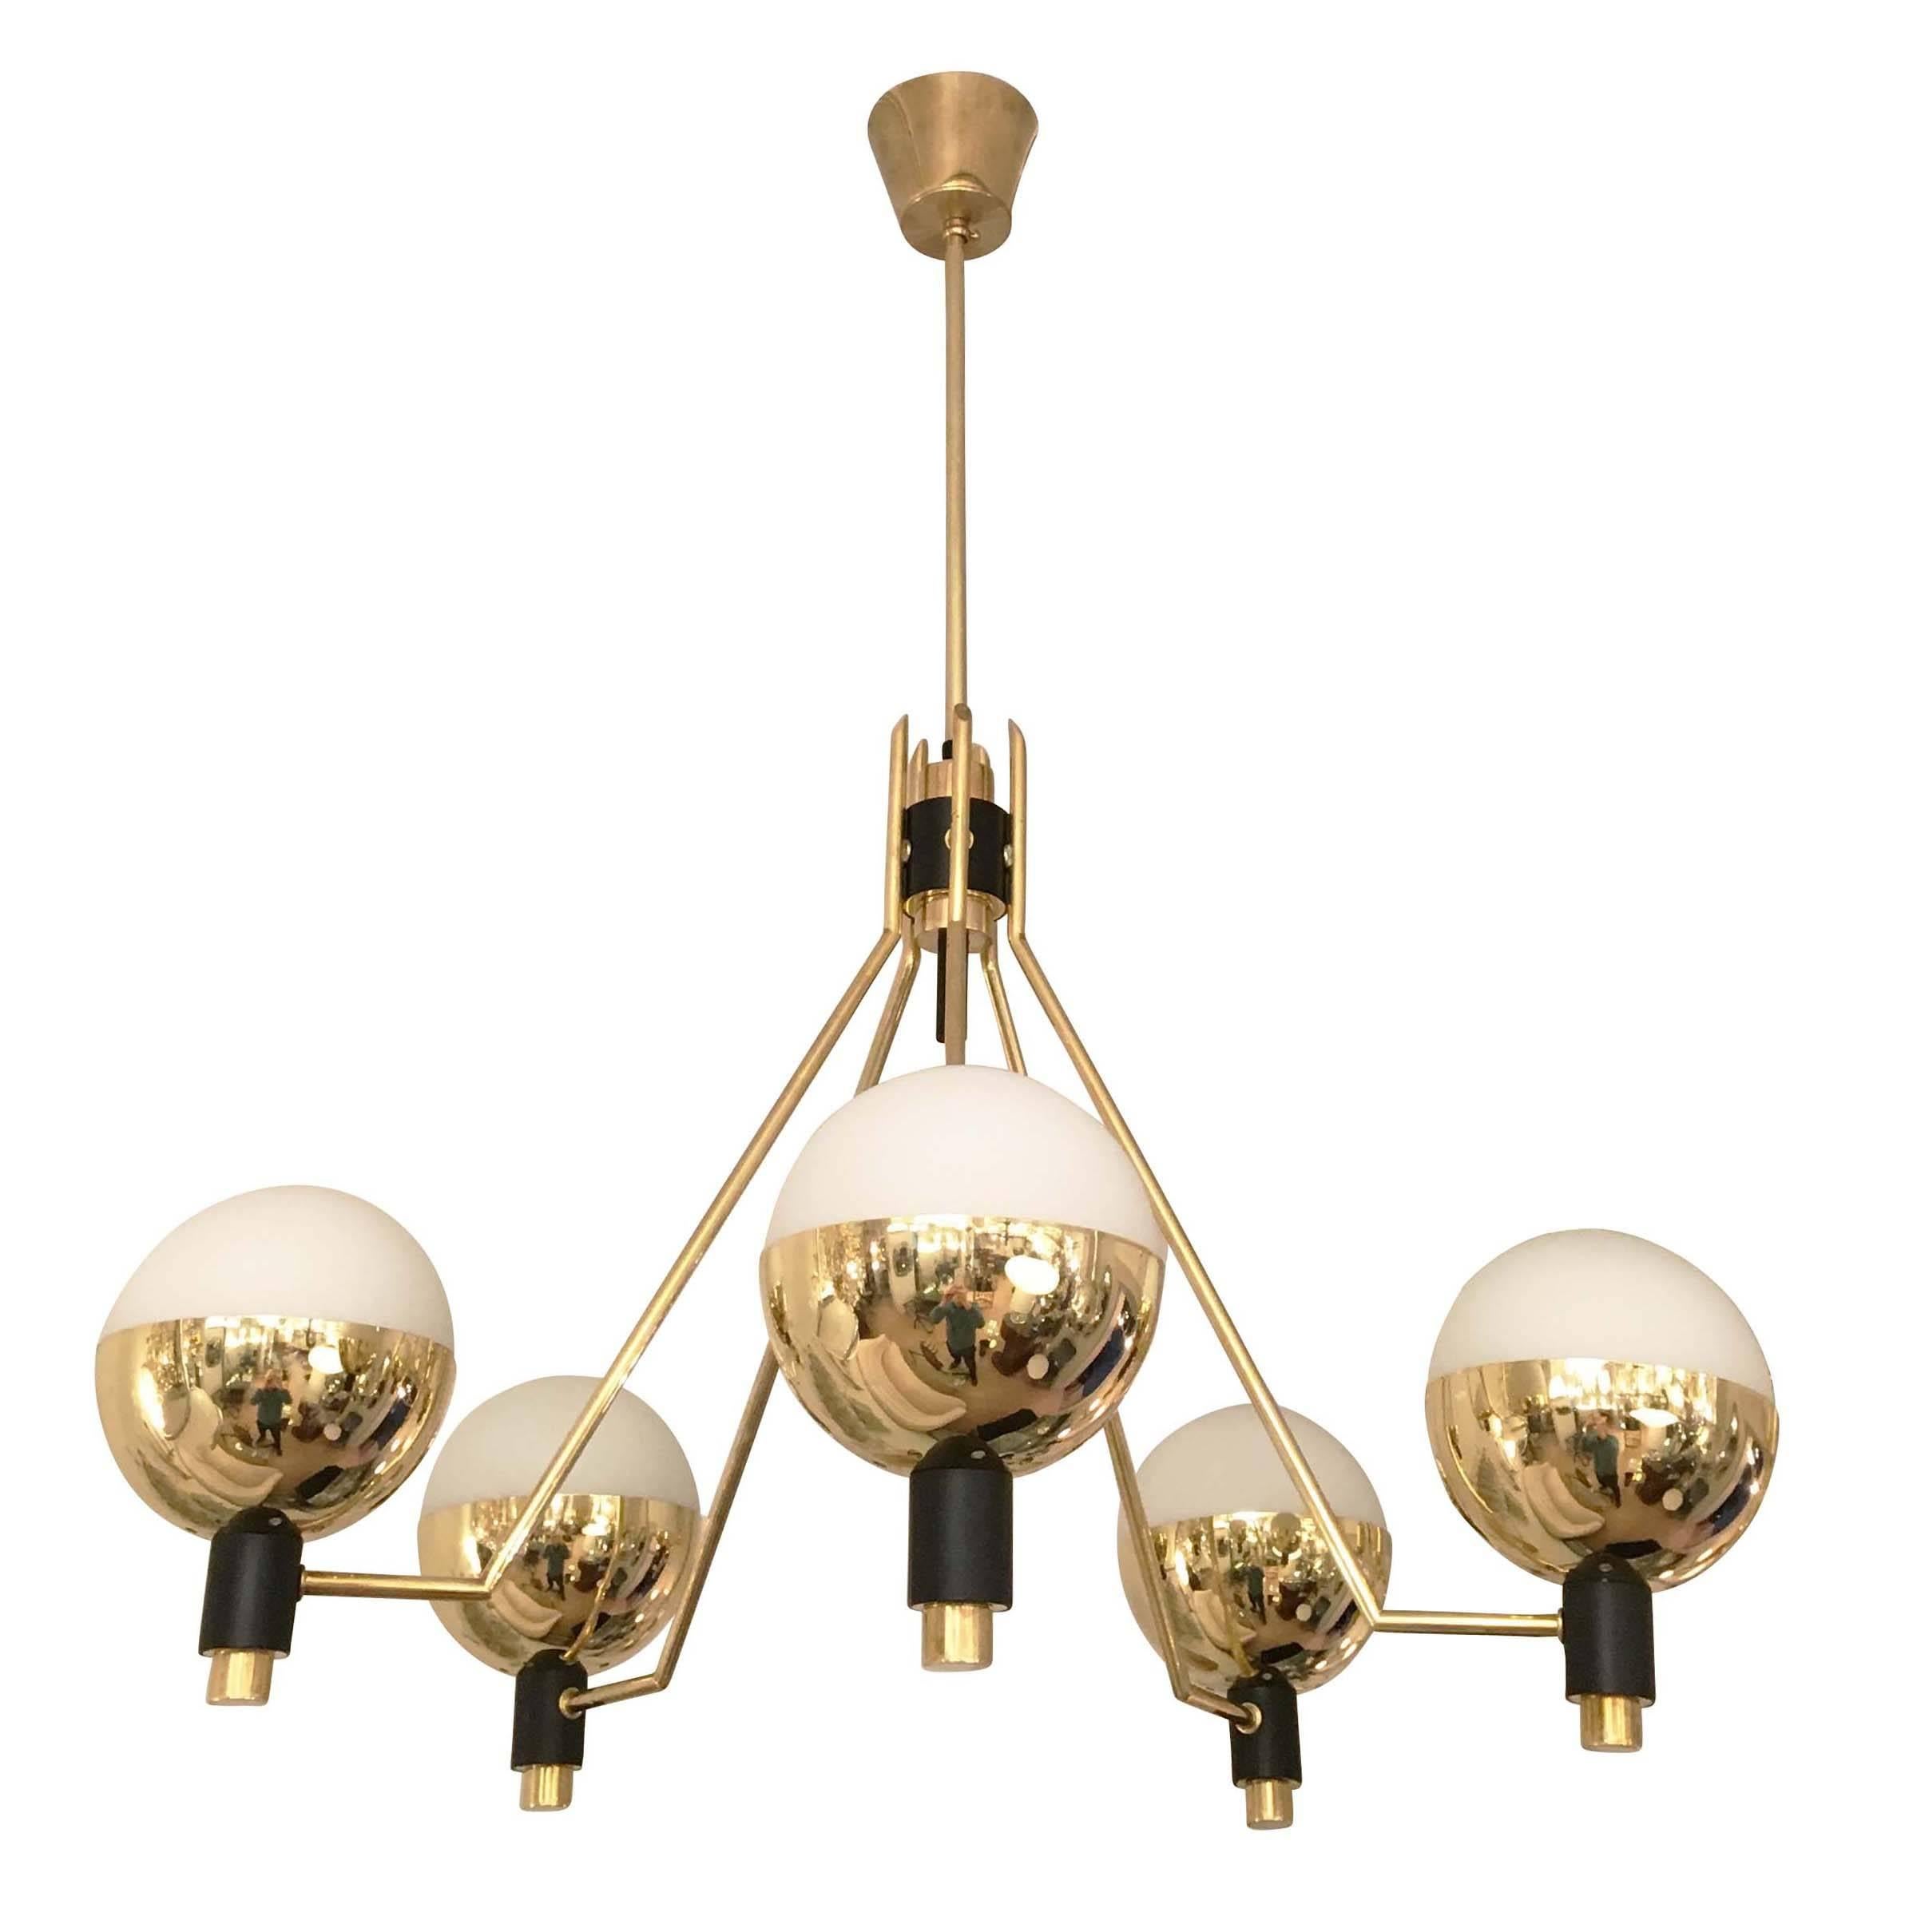 Italian Mid-Century chandelier attributed to Stilnovo featuring five arms ending in round satin glass shades. The frame is all brass with some parts lacquered black. Height of stem can be changed upon request.
